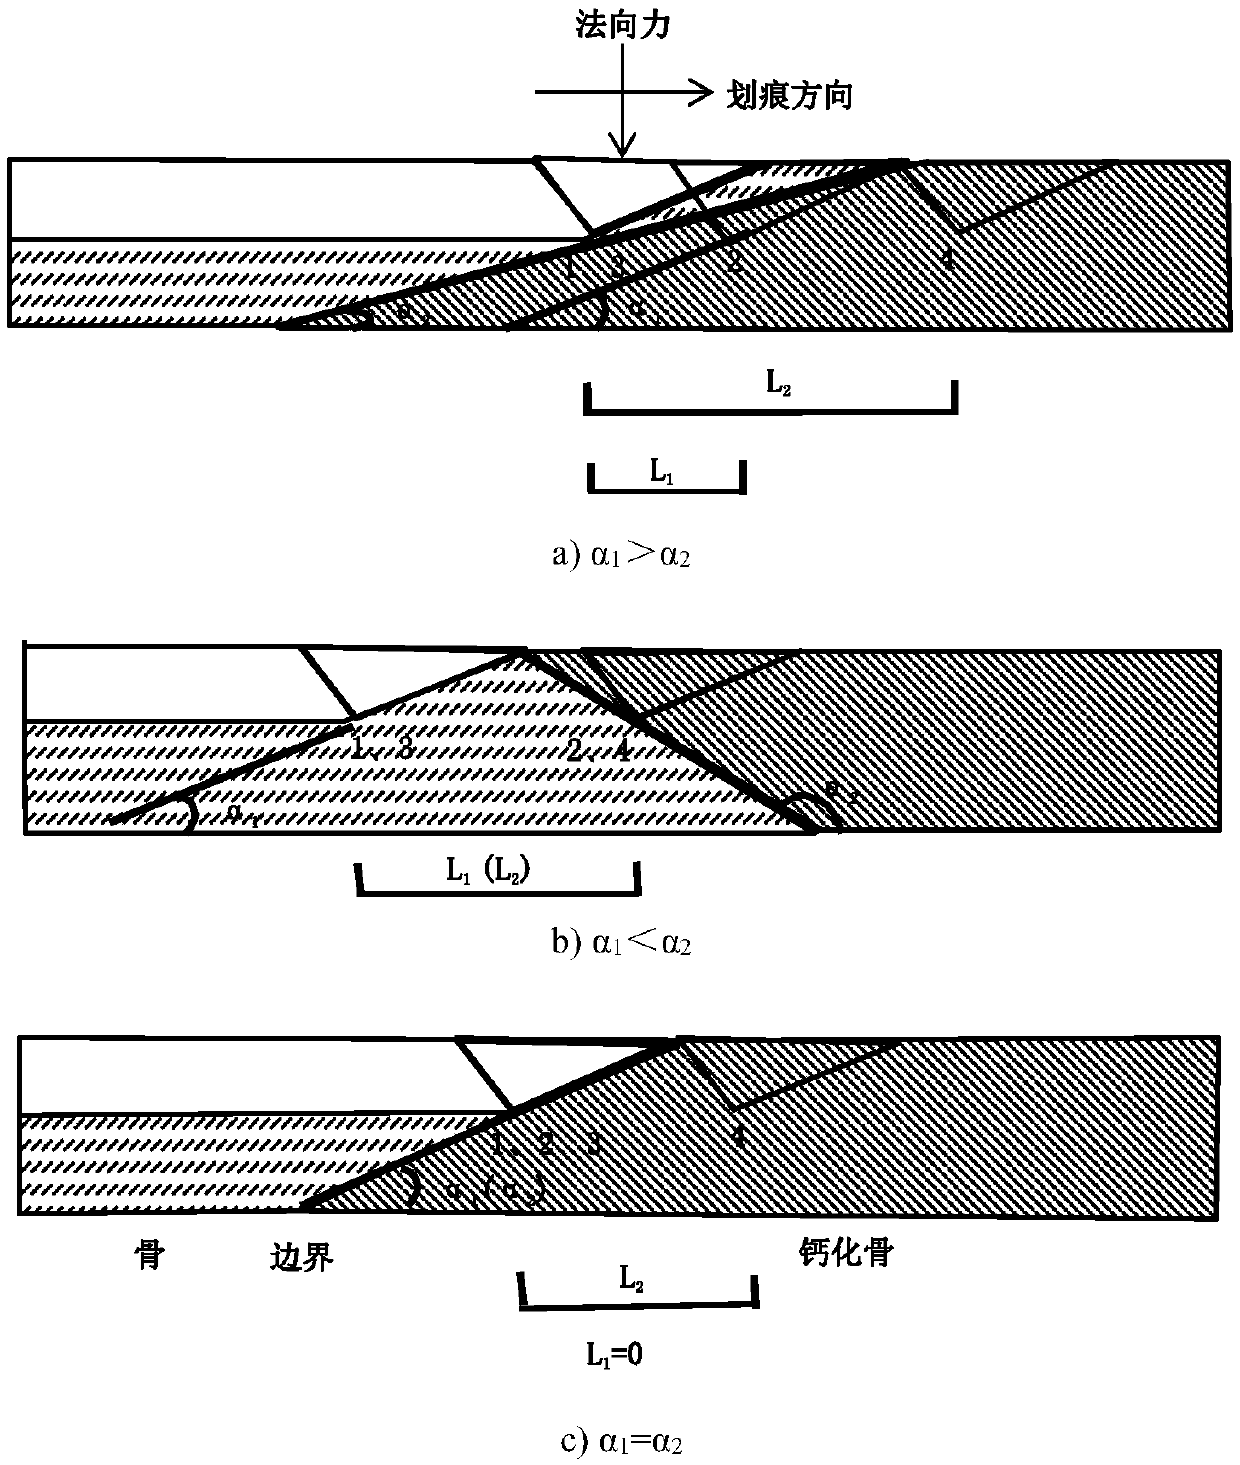 Method for testing mechanical performances of calcified bone based on nano-indentation and nano-scratch